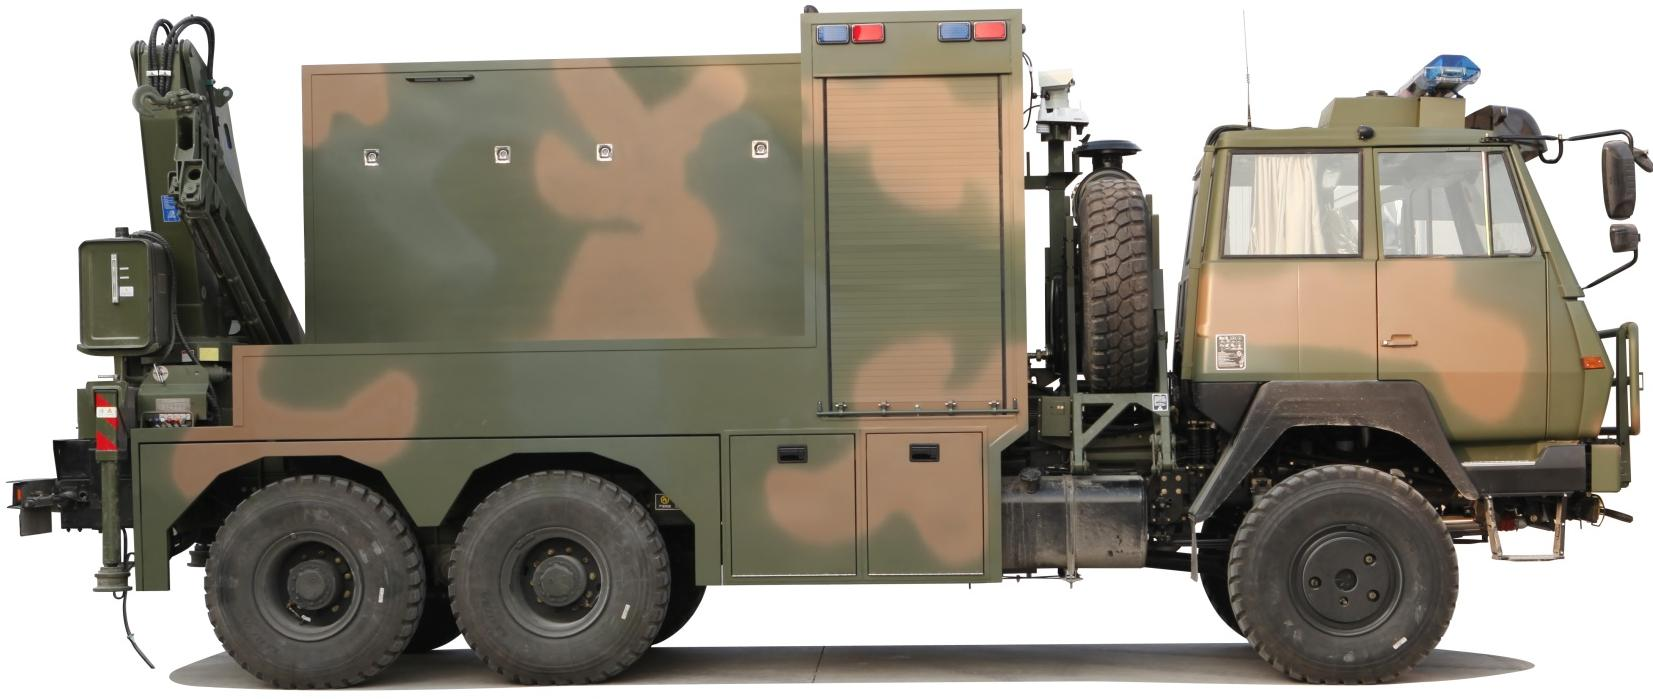 SMARTNOBLE's Helicopter Rescue Vehicle: Redefining Military Vehicles